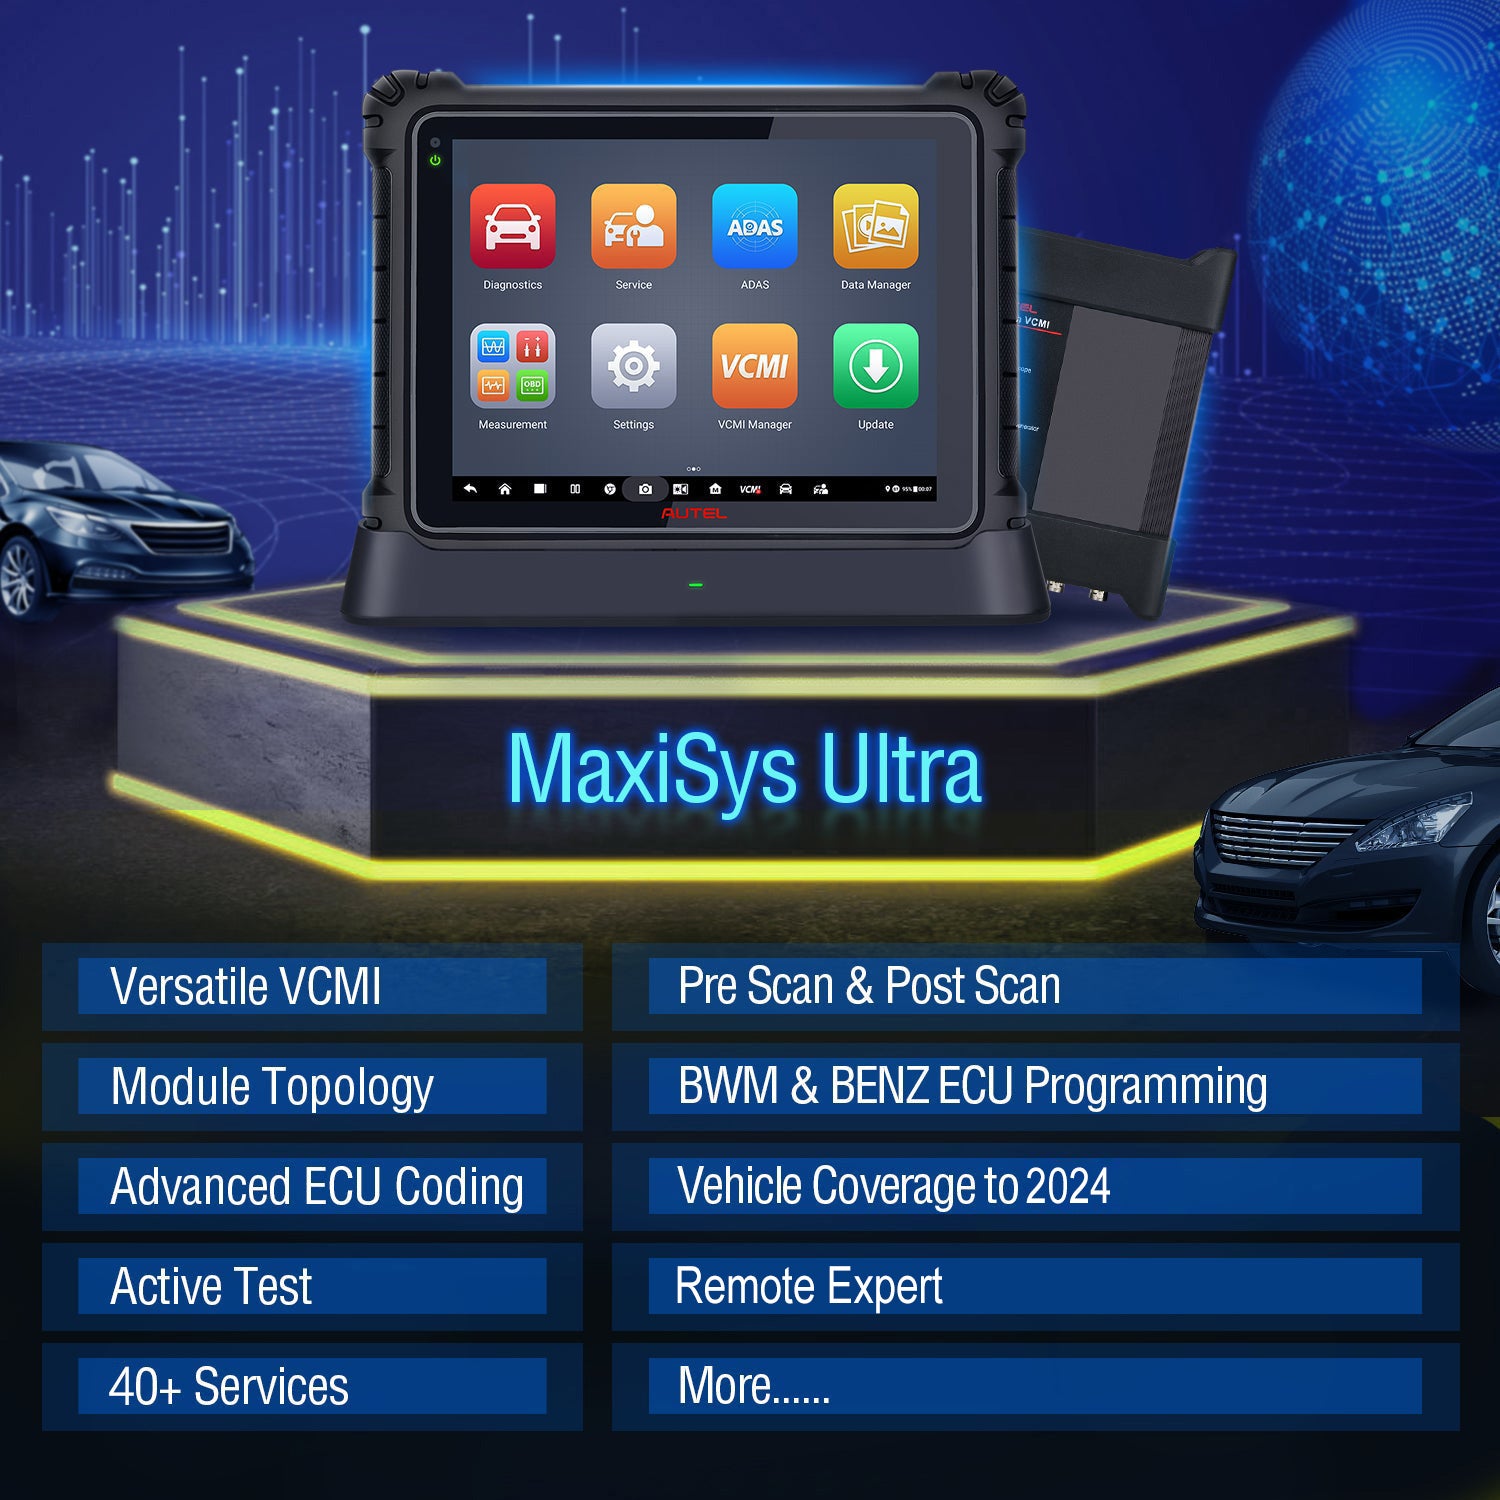 Autel Maxisys Ultra Diagnostic Tablet Overview